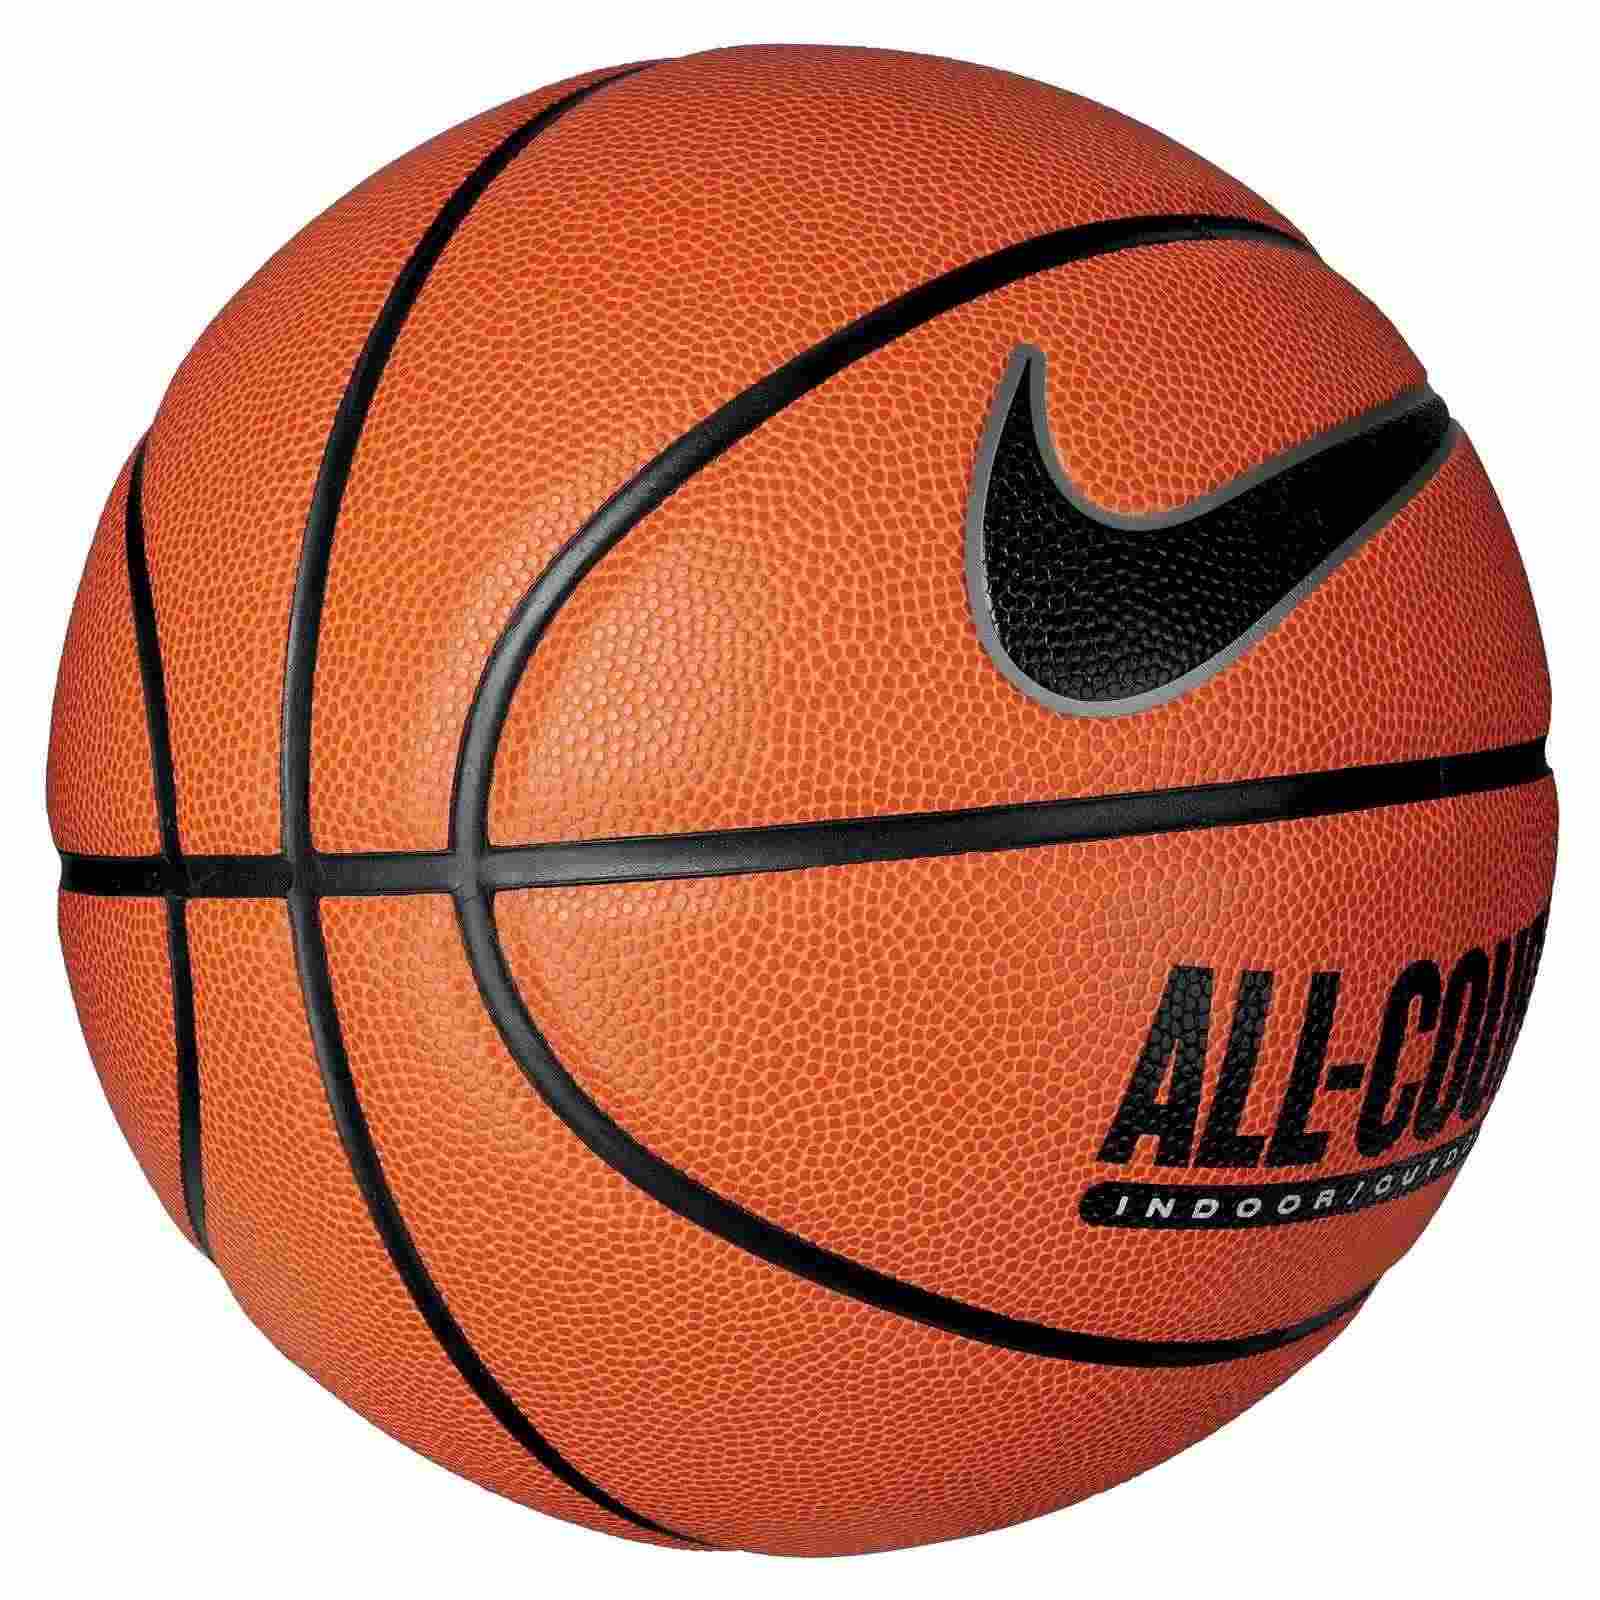 NIKE EVERYDAY ALL COURT 8P BASKETBALL 